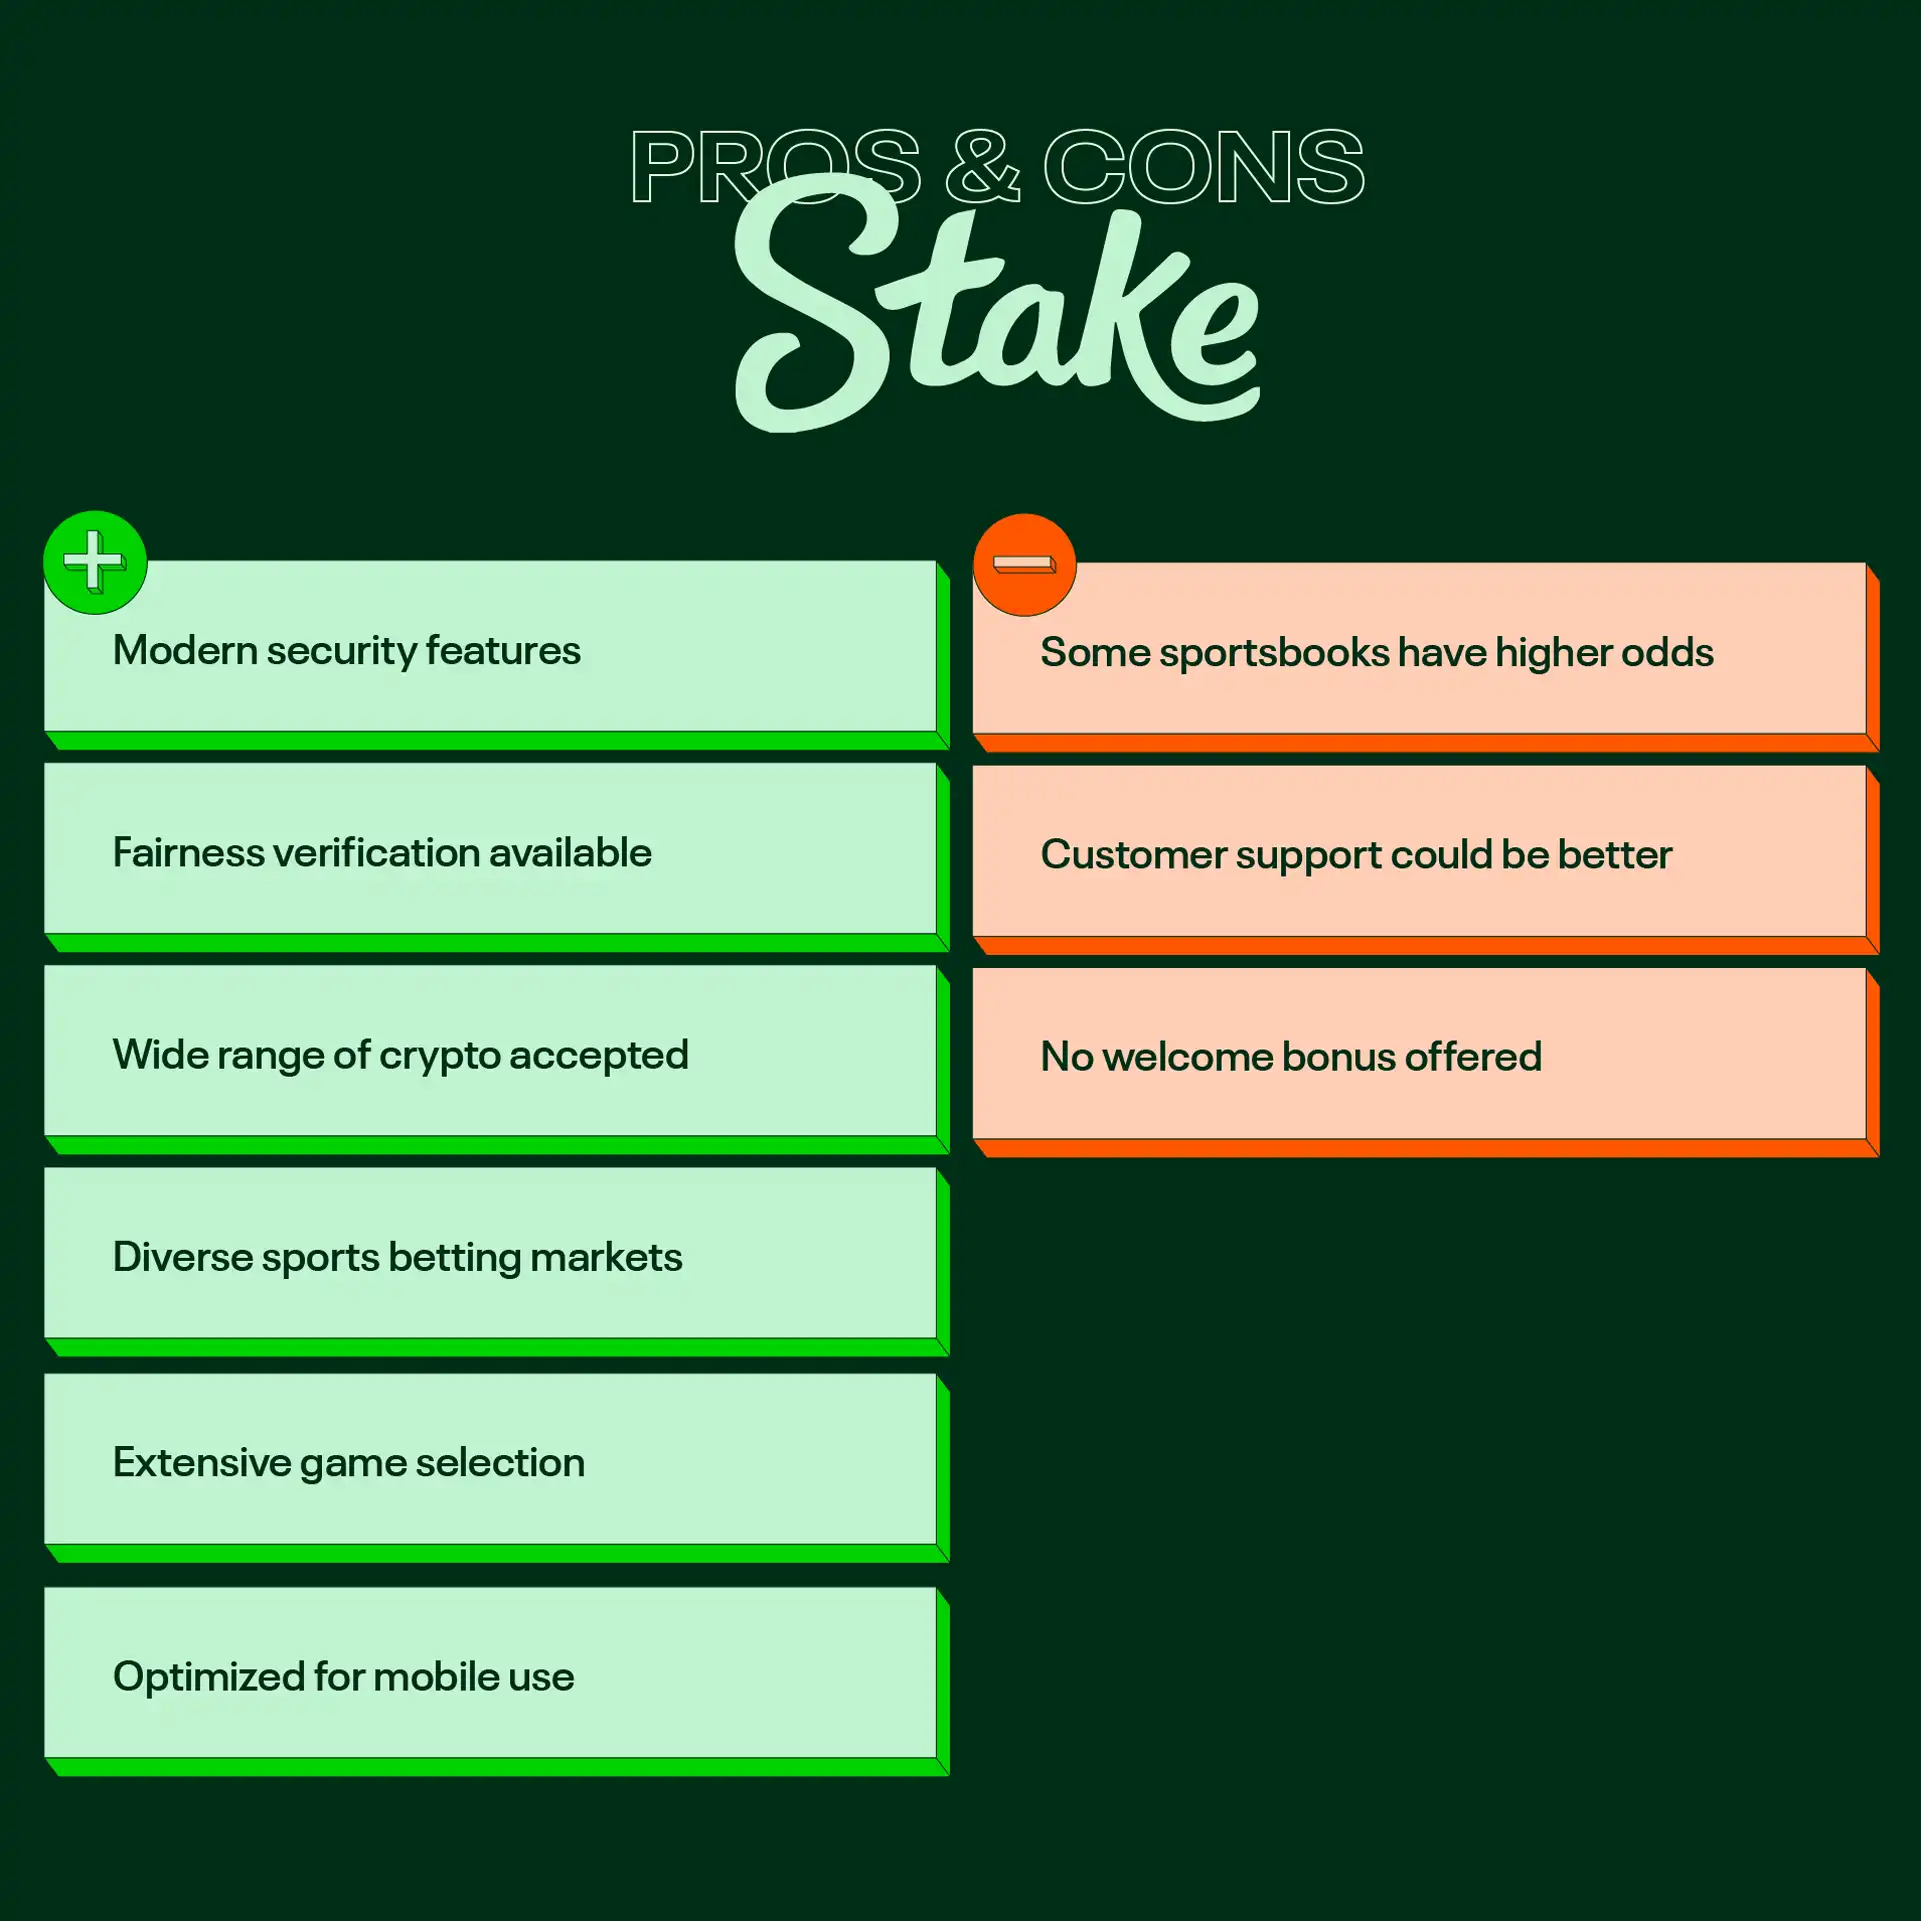 Pros and cons of Stake Casino